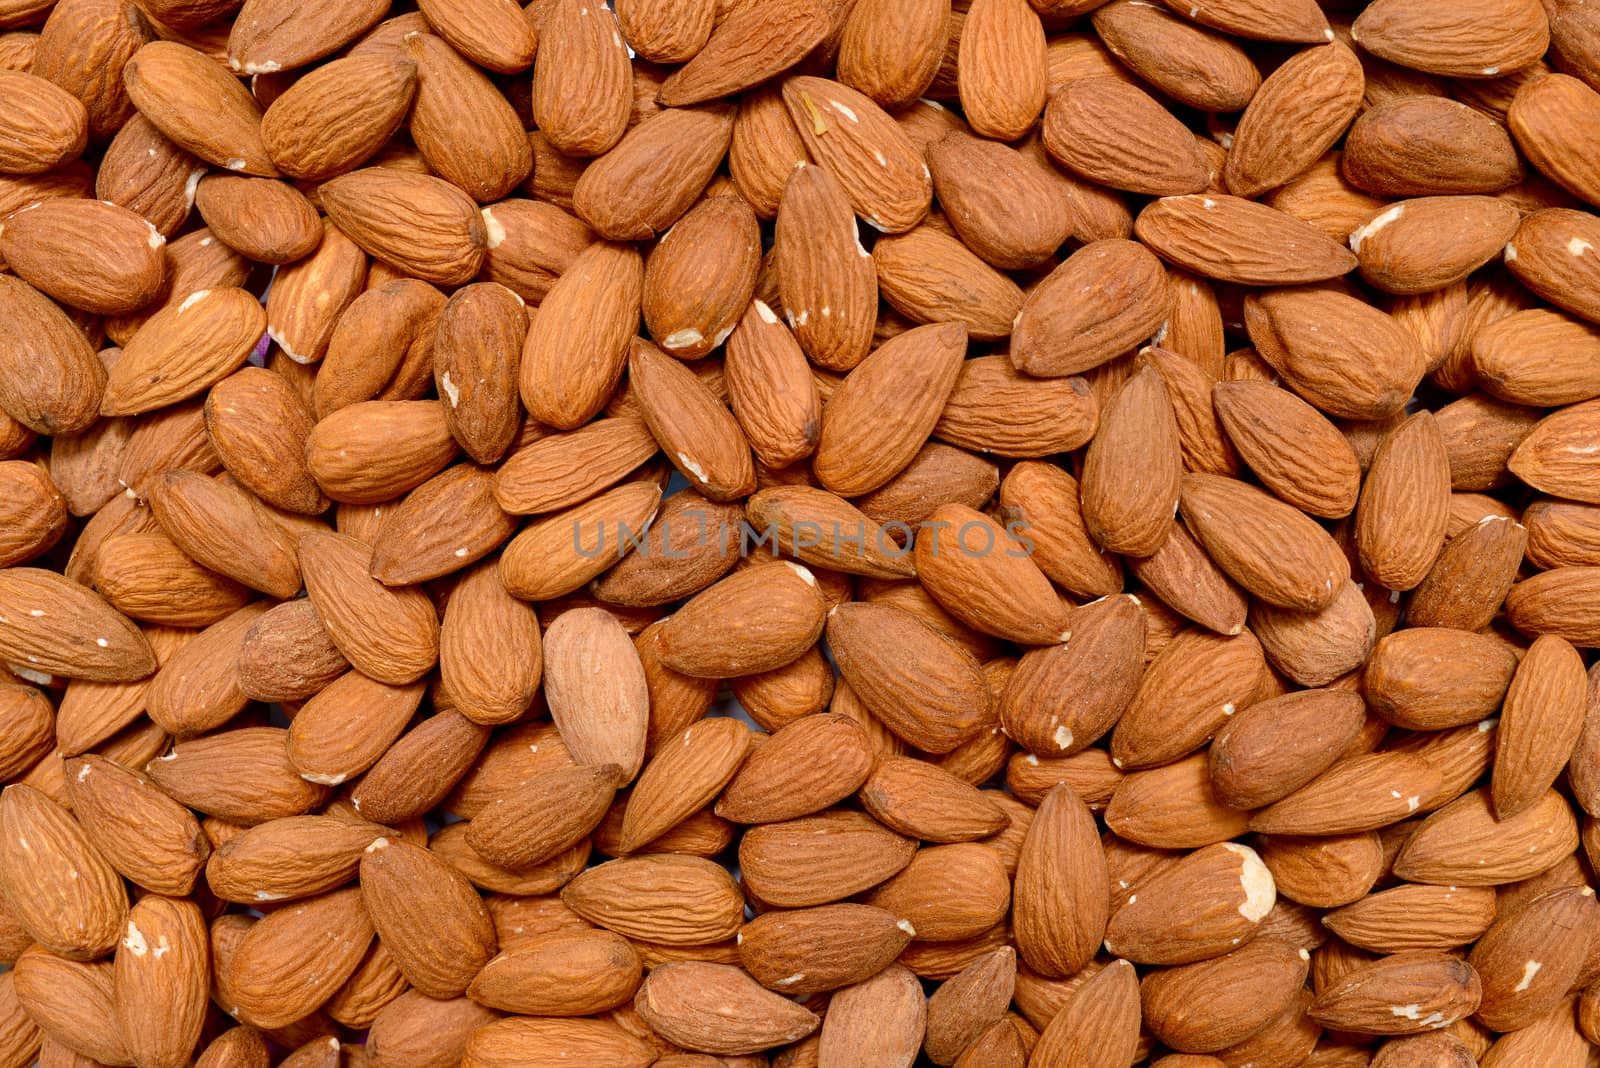 almonds plant dry seeds texture pattern background